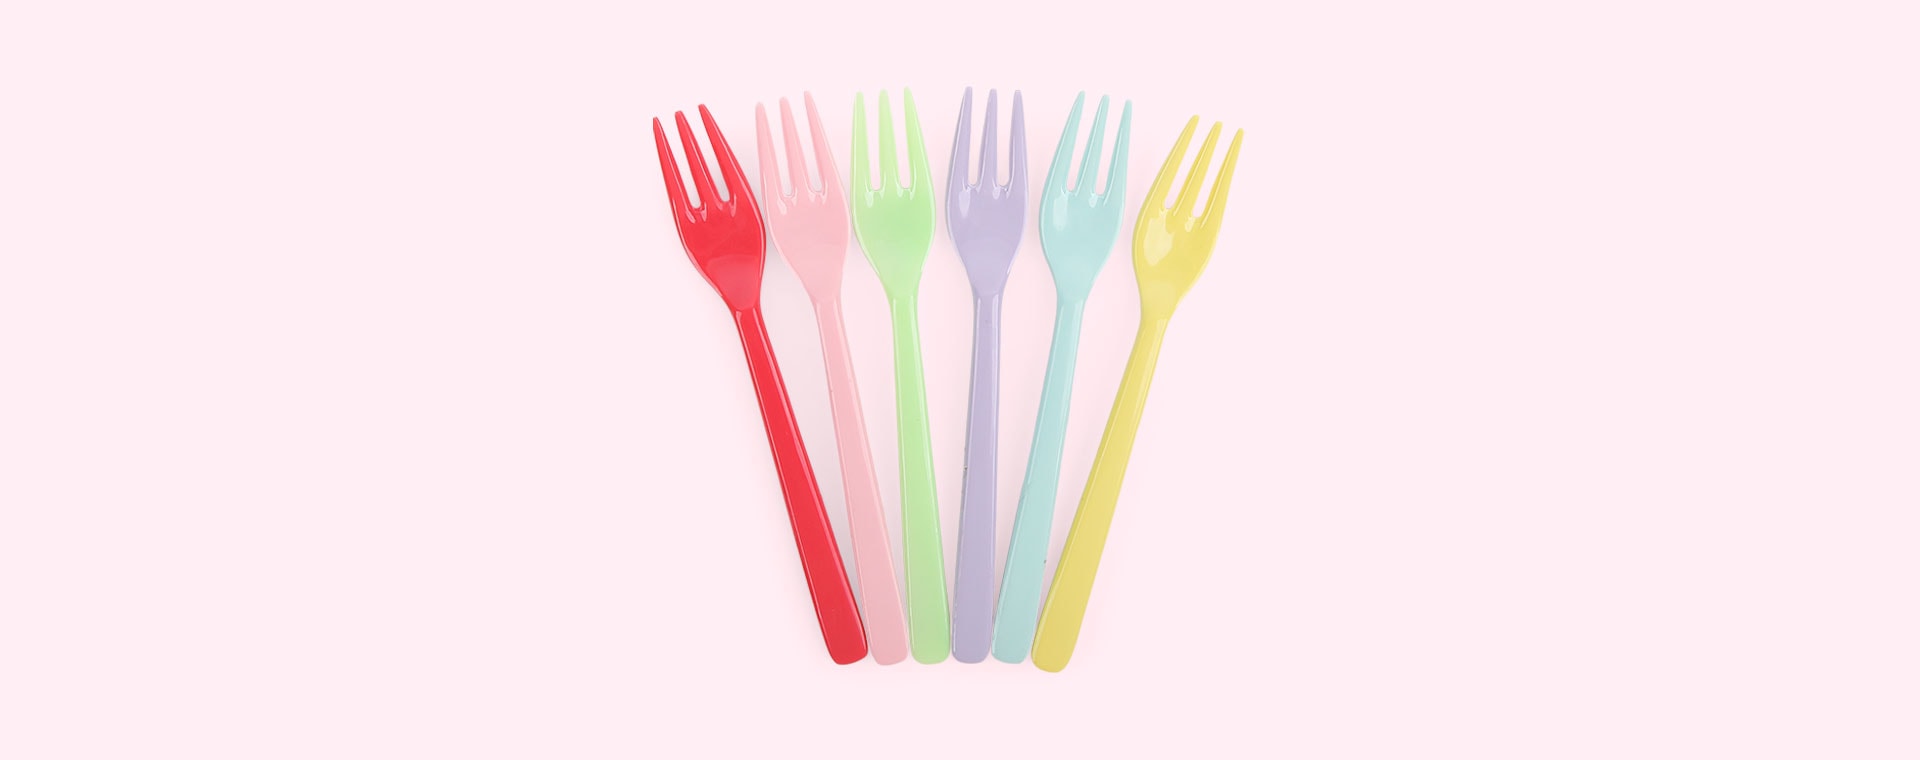 Yippie Yippie Yeah Forks Rice 6-Pack Melamine Cutlery